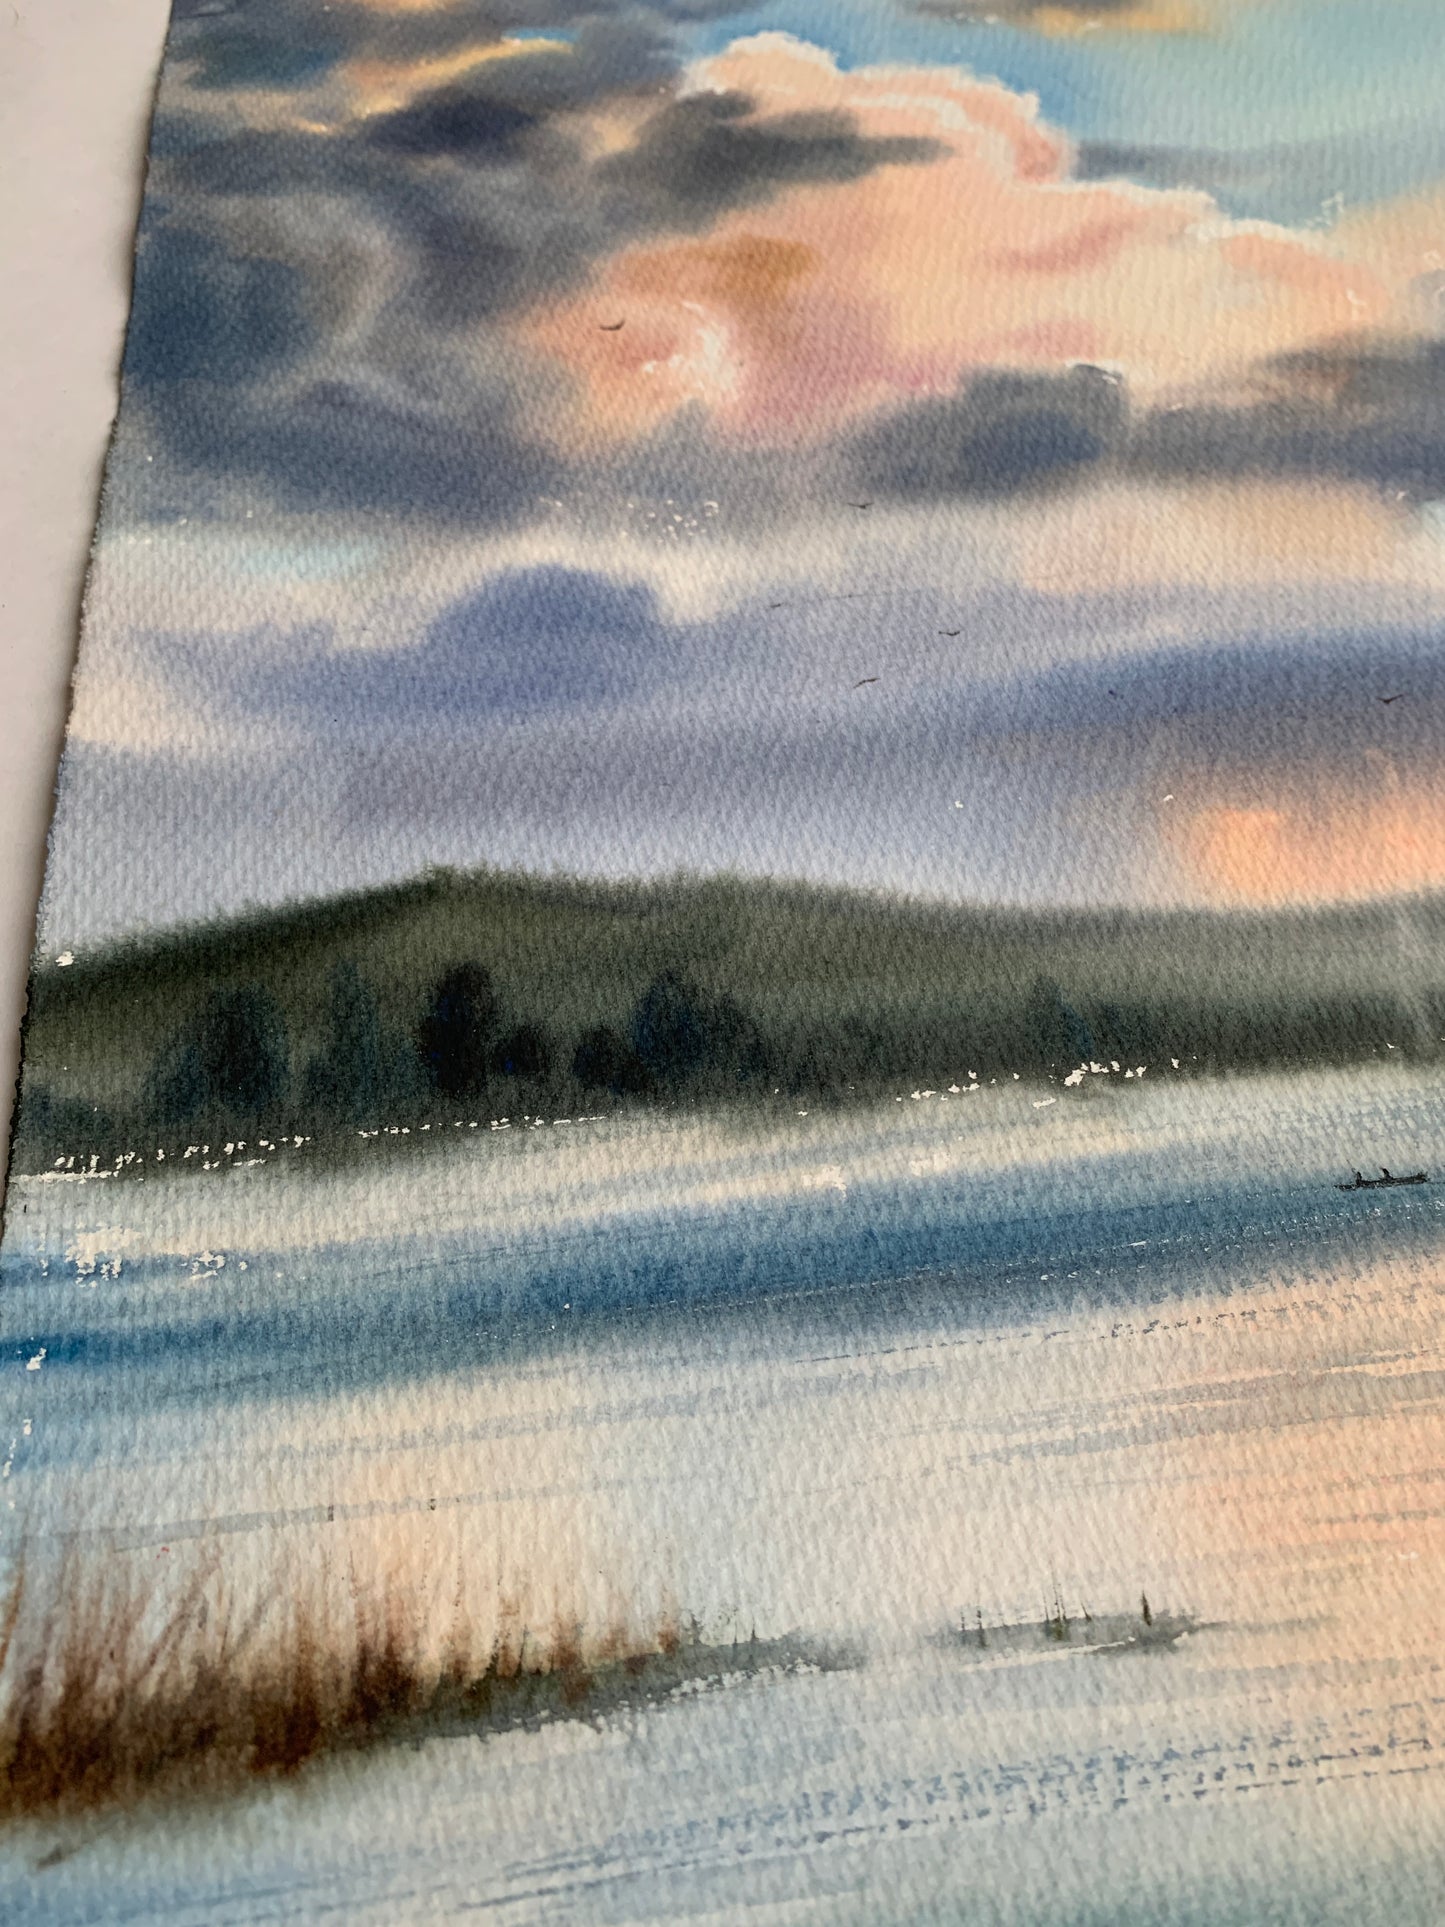 Painting Original Watercolor - Lake and clouds - 22 x 15 in